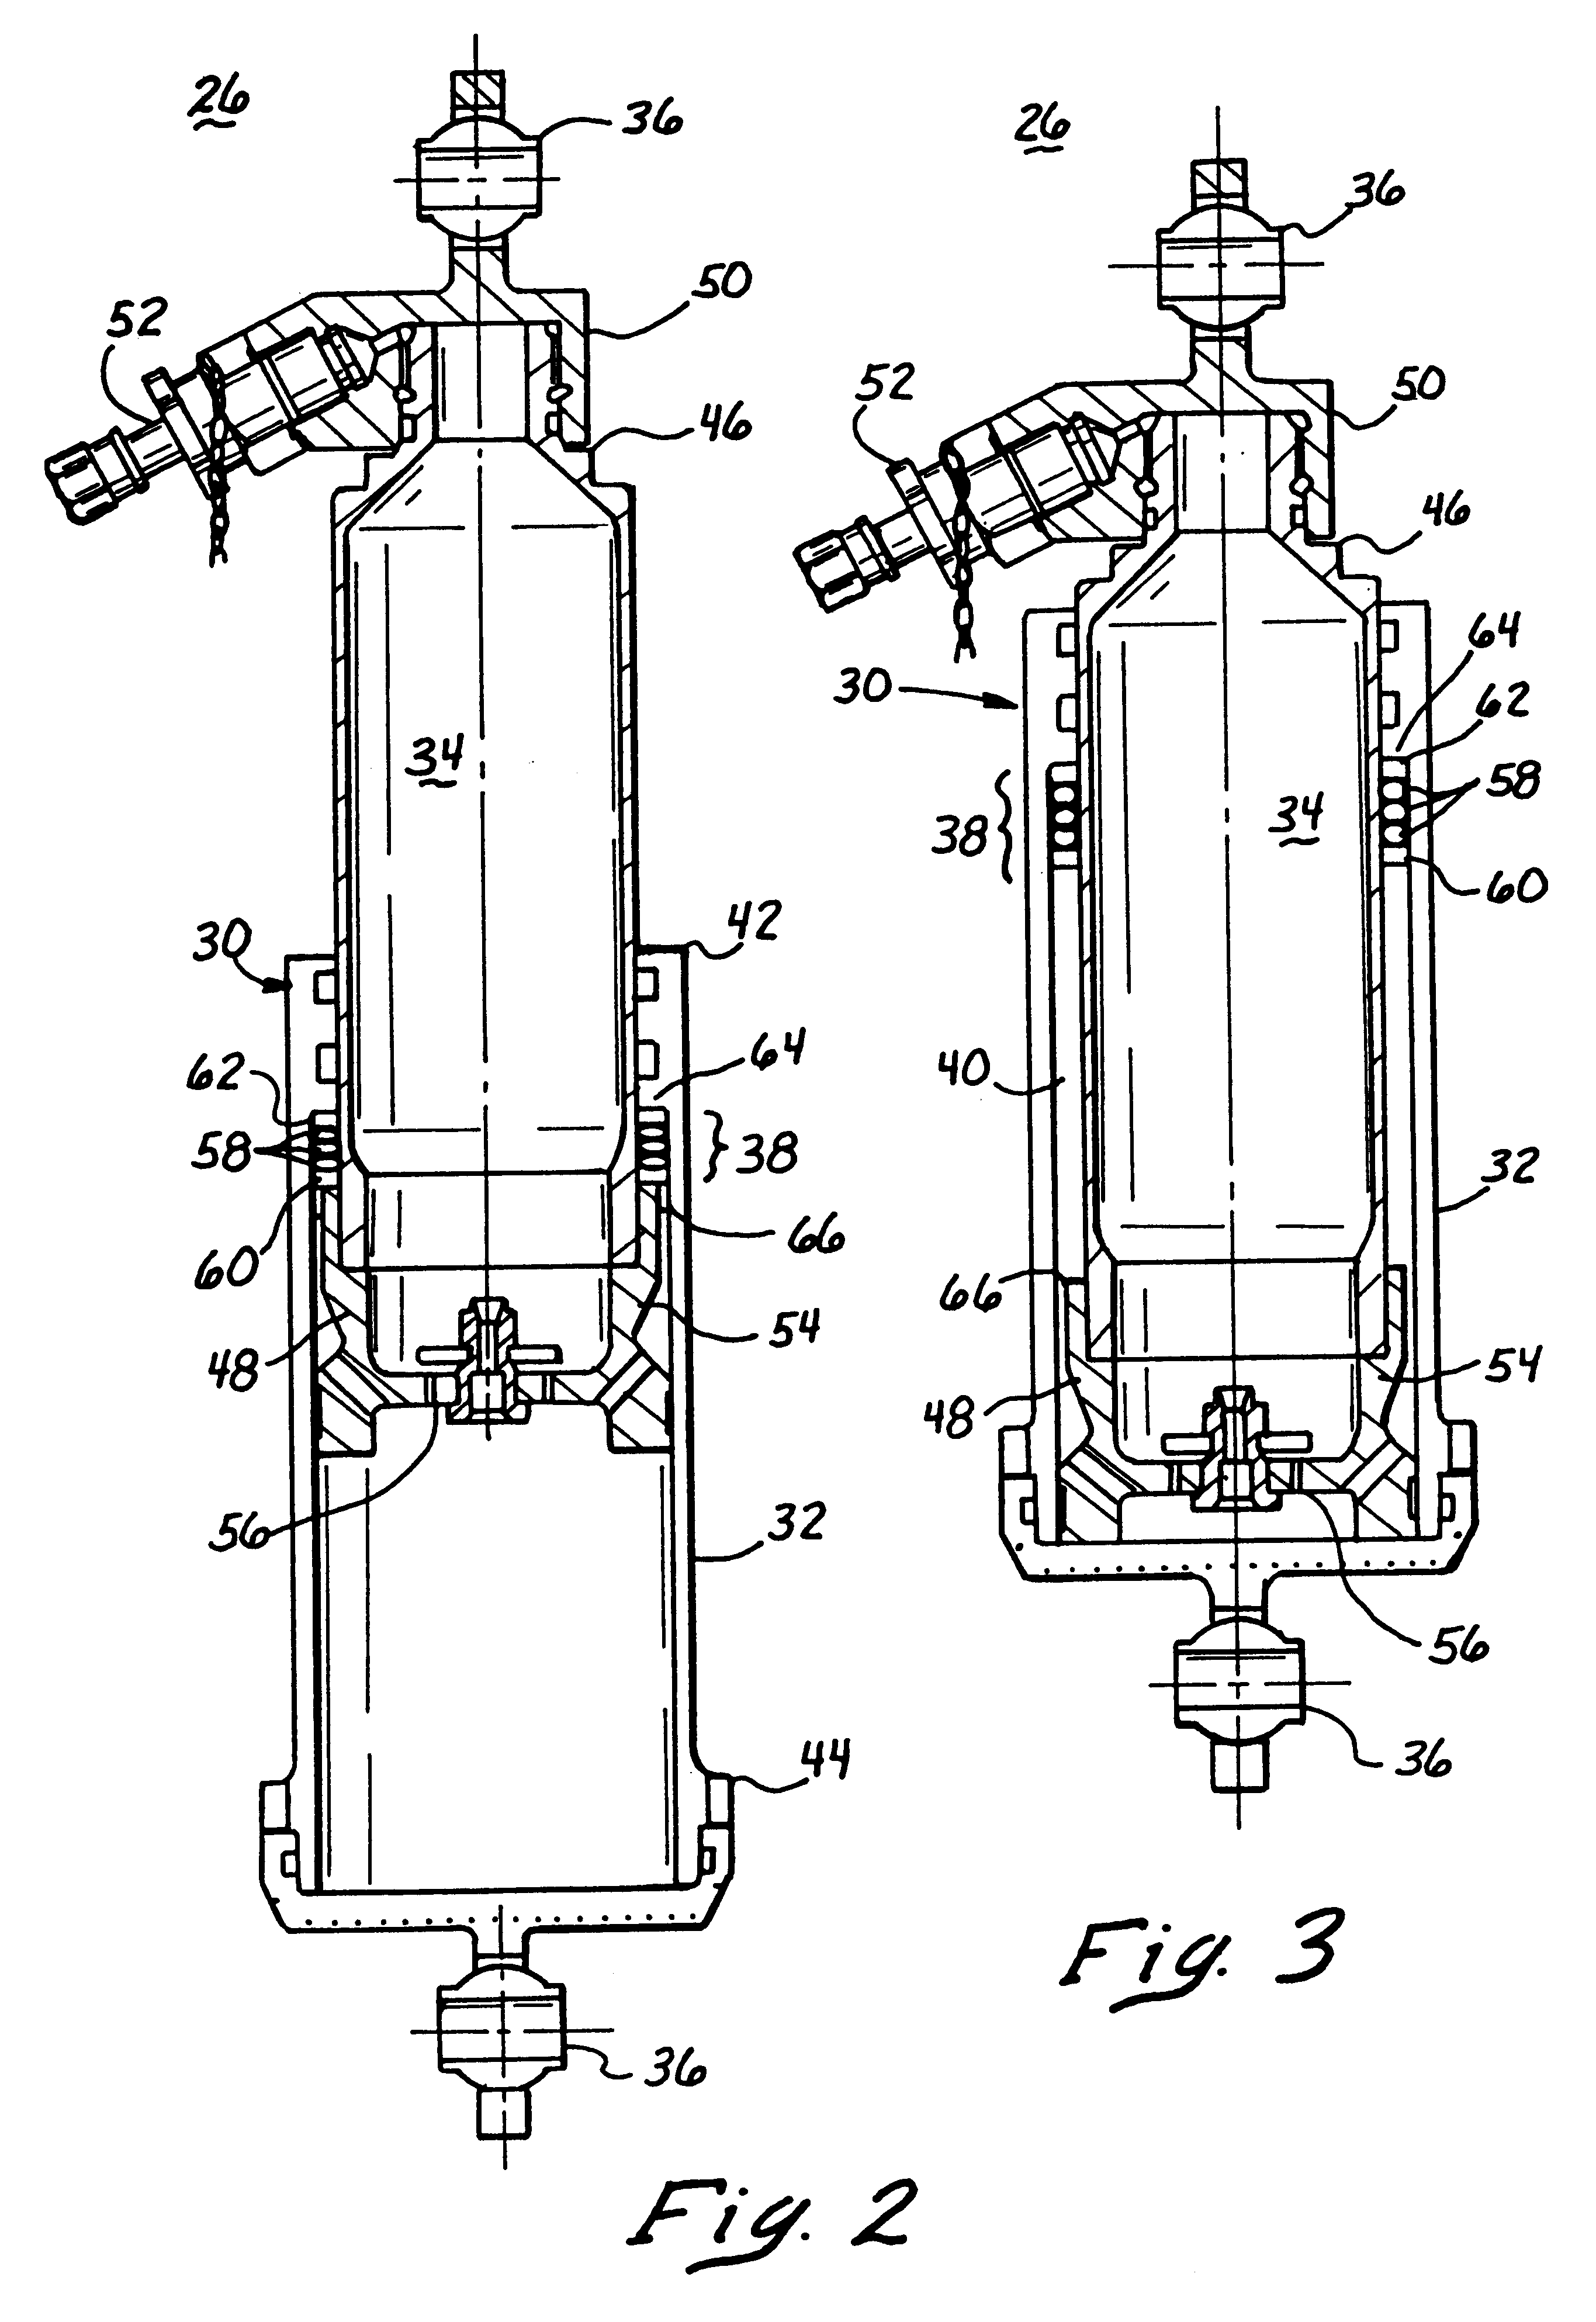 Hydraulic damper with elastomeric spring assembly